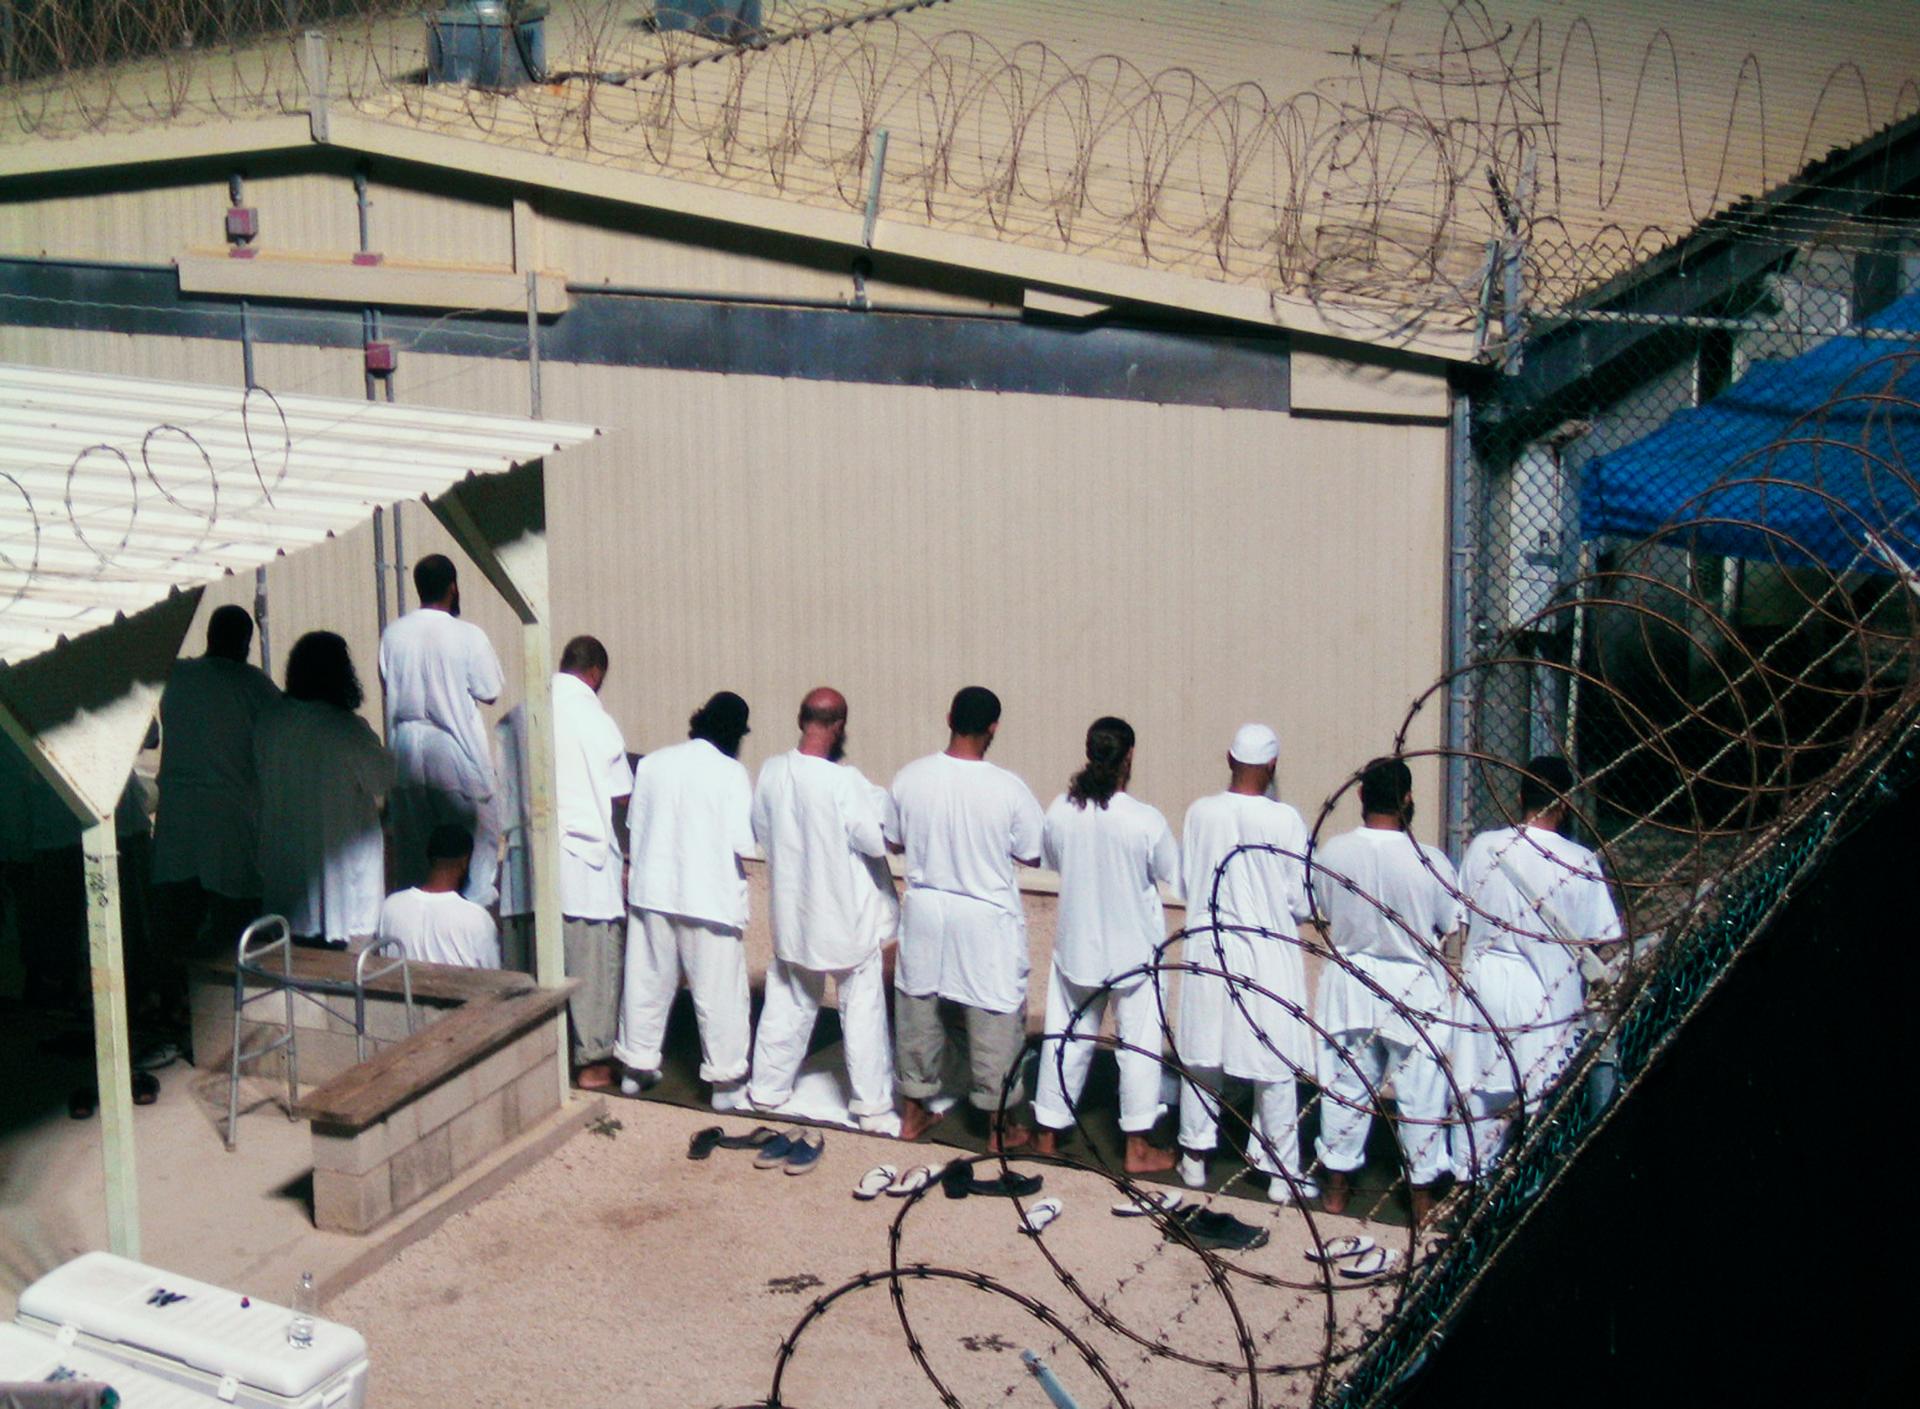 Detainees participate in an early morning prayer session at Camp IV at the detention facility in Guantanamo Bay